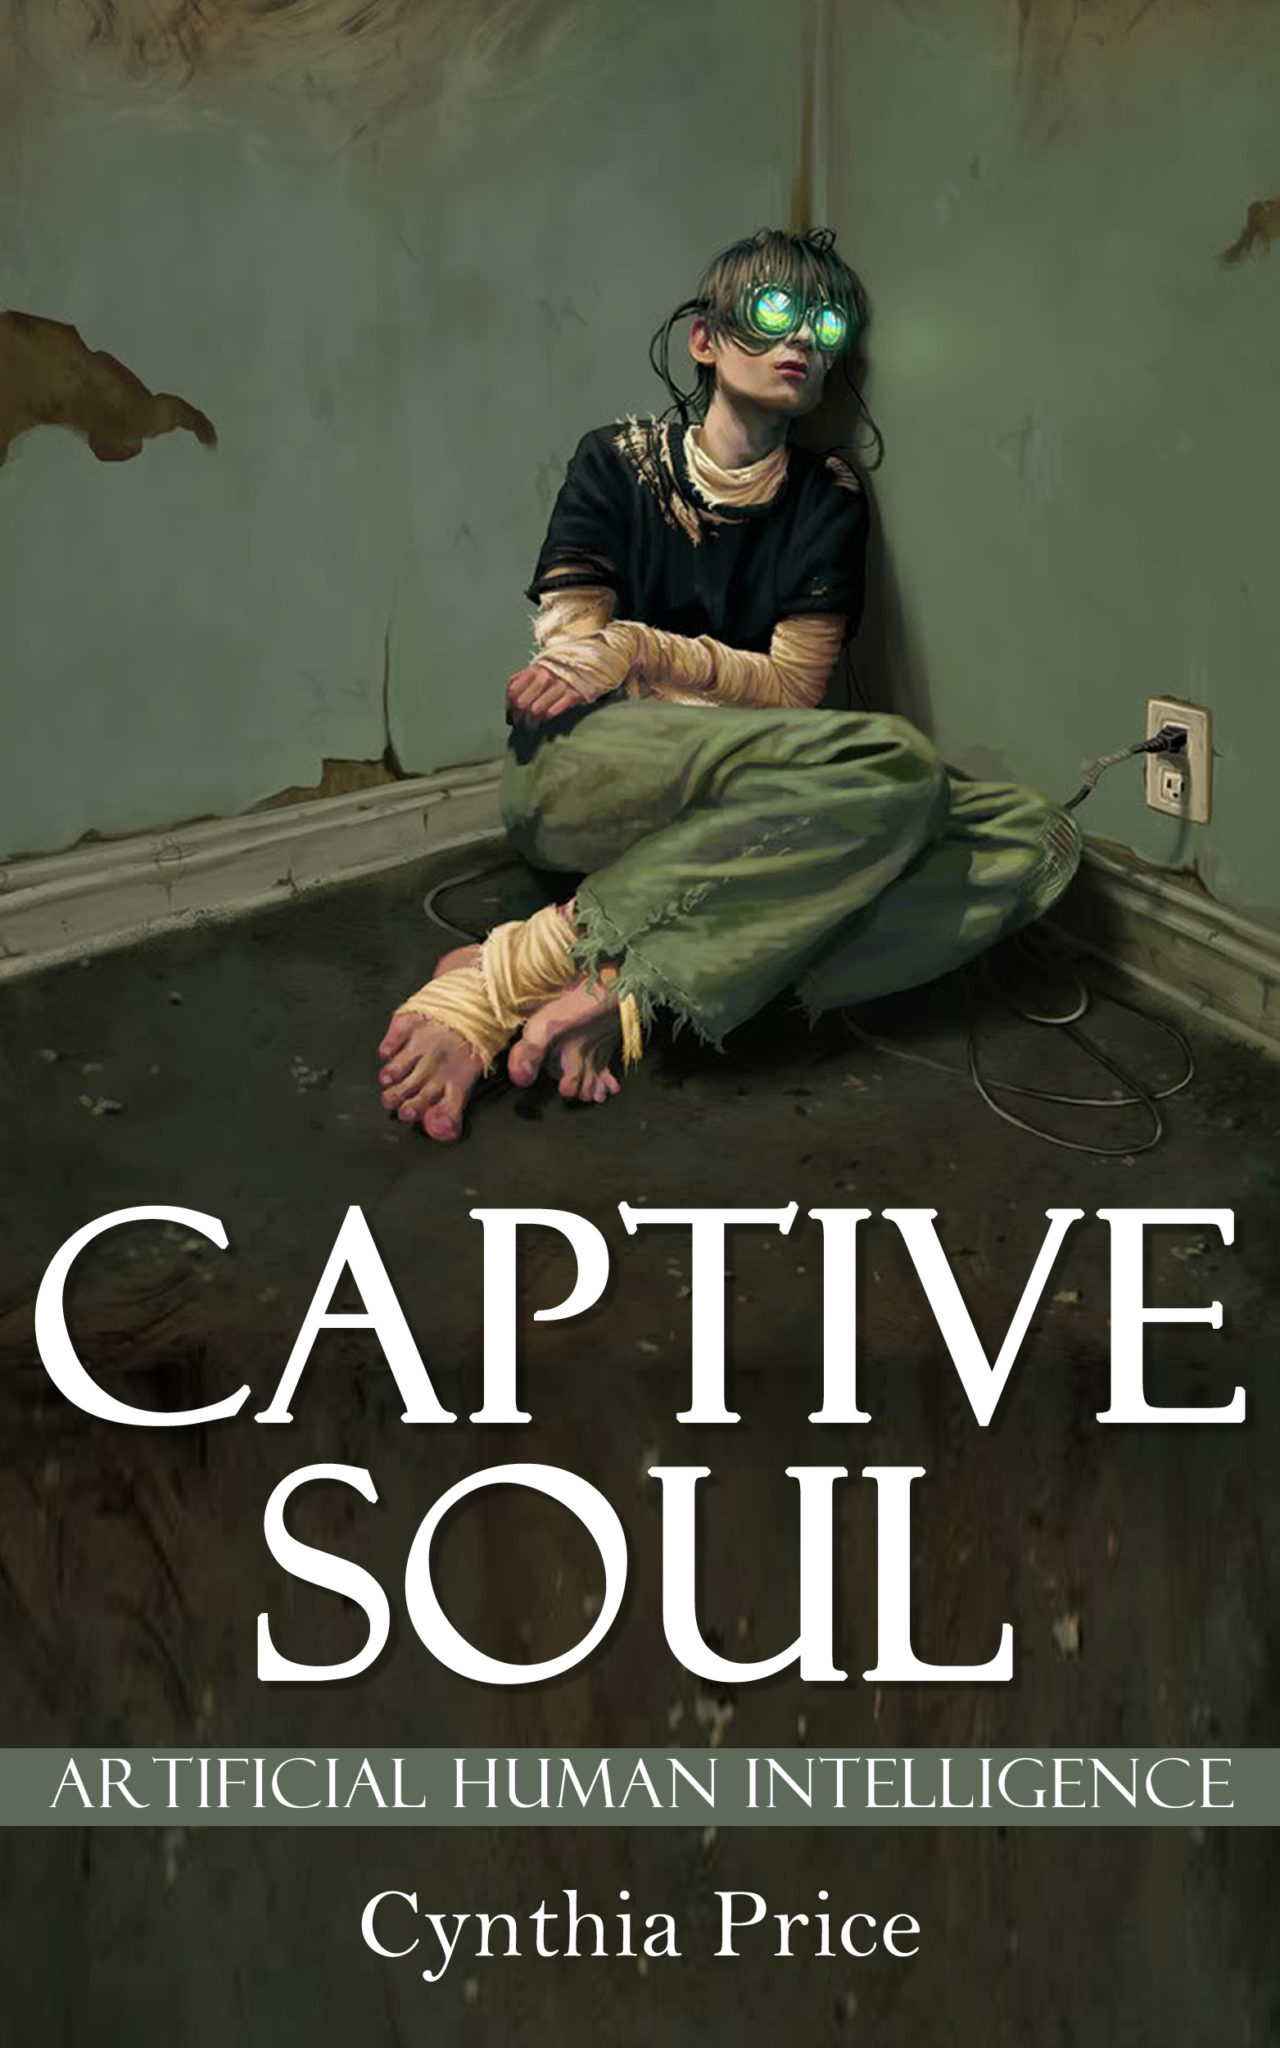 FREE: Science Fiction: Captive Soul: Artificial Human Intelligence (Captive Soul, Sci-Fi, Fantasy, Futuristic, Apocalyptic, Artificial Intelligance, Technological, Adventure Book 1) by Cynthia Price